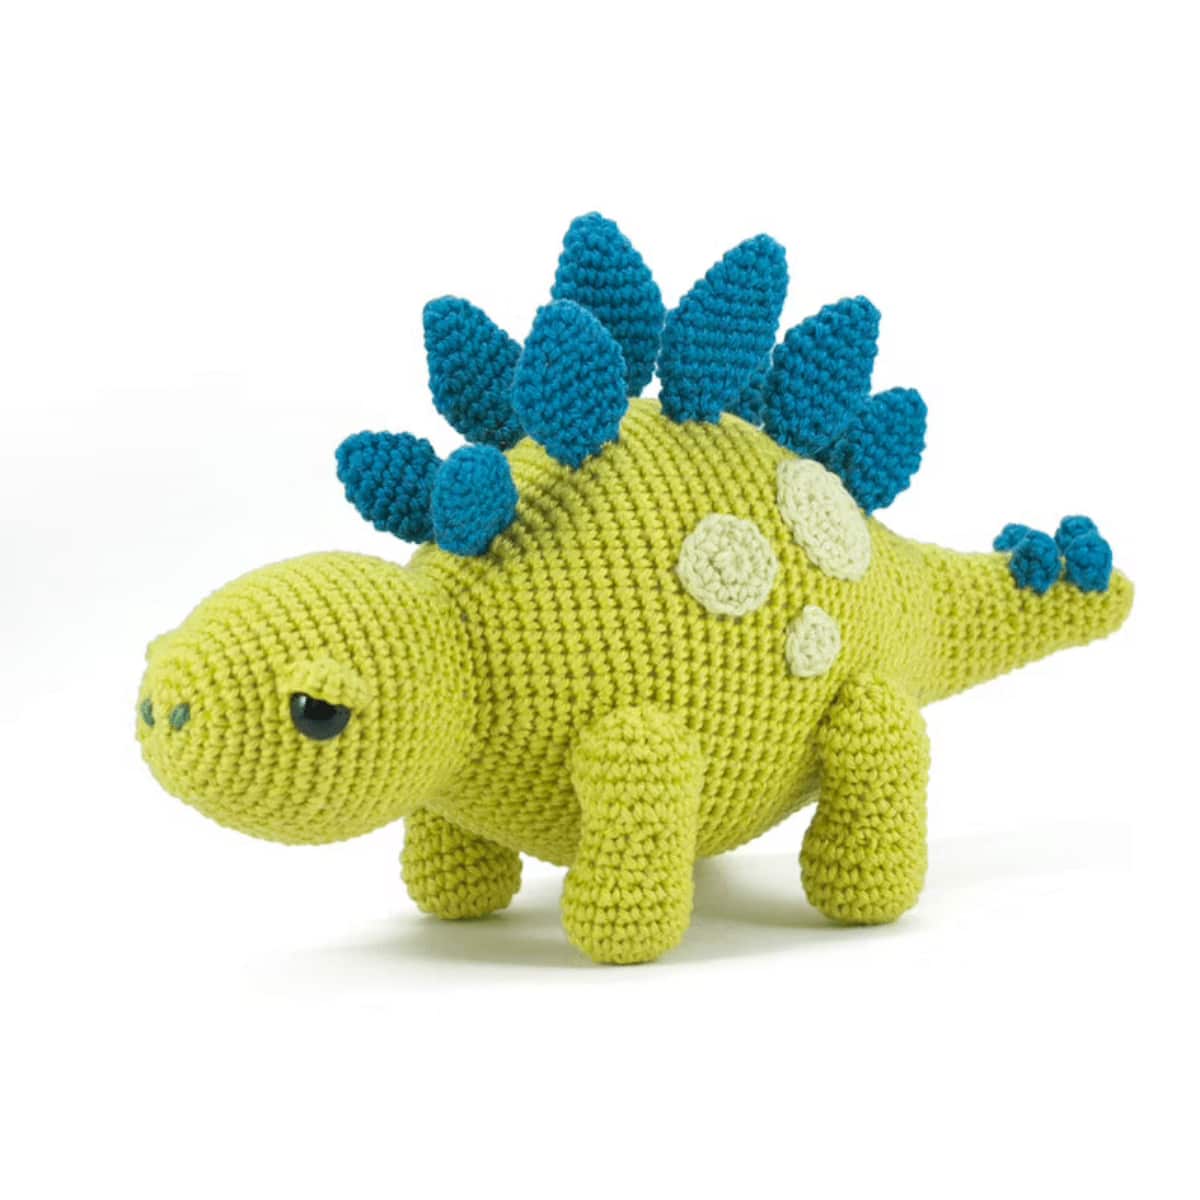 Green Stegosaurus with light green spots and dark blue spikes over its back standing on a white background.